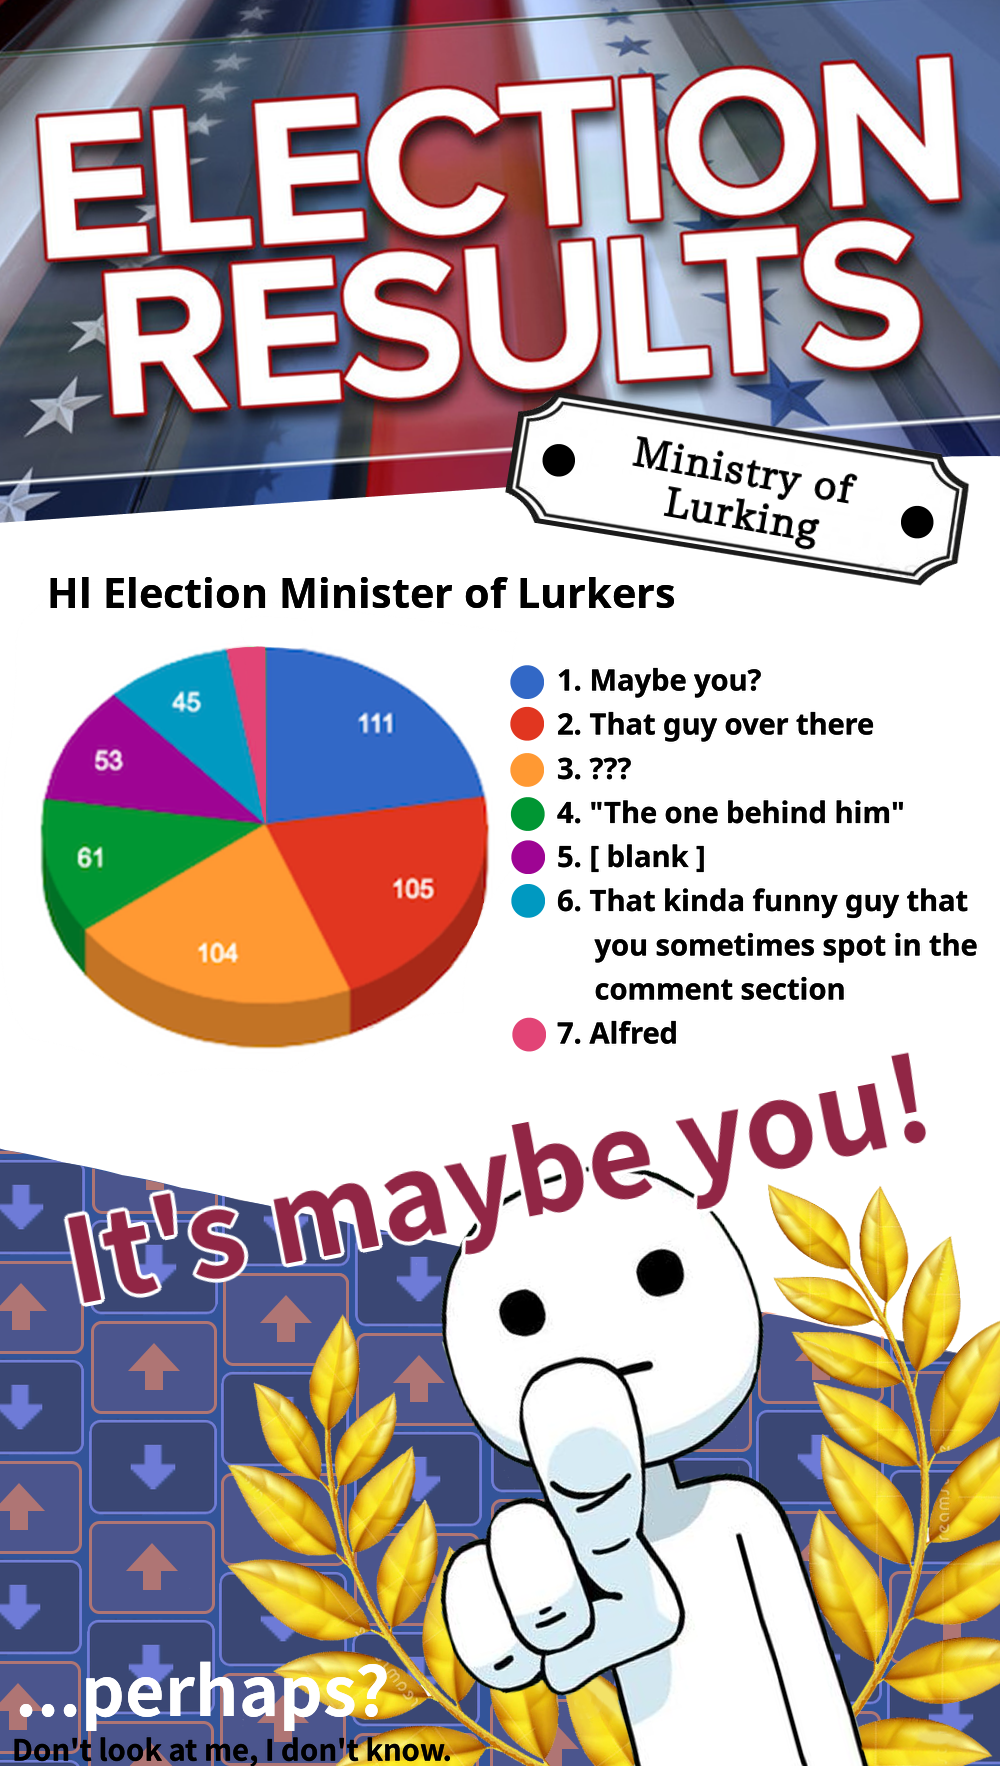 Congratulations to you?!, Minister of Lurkers!